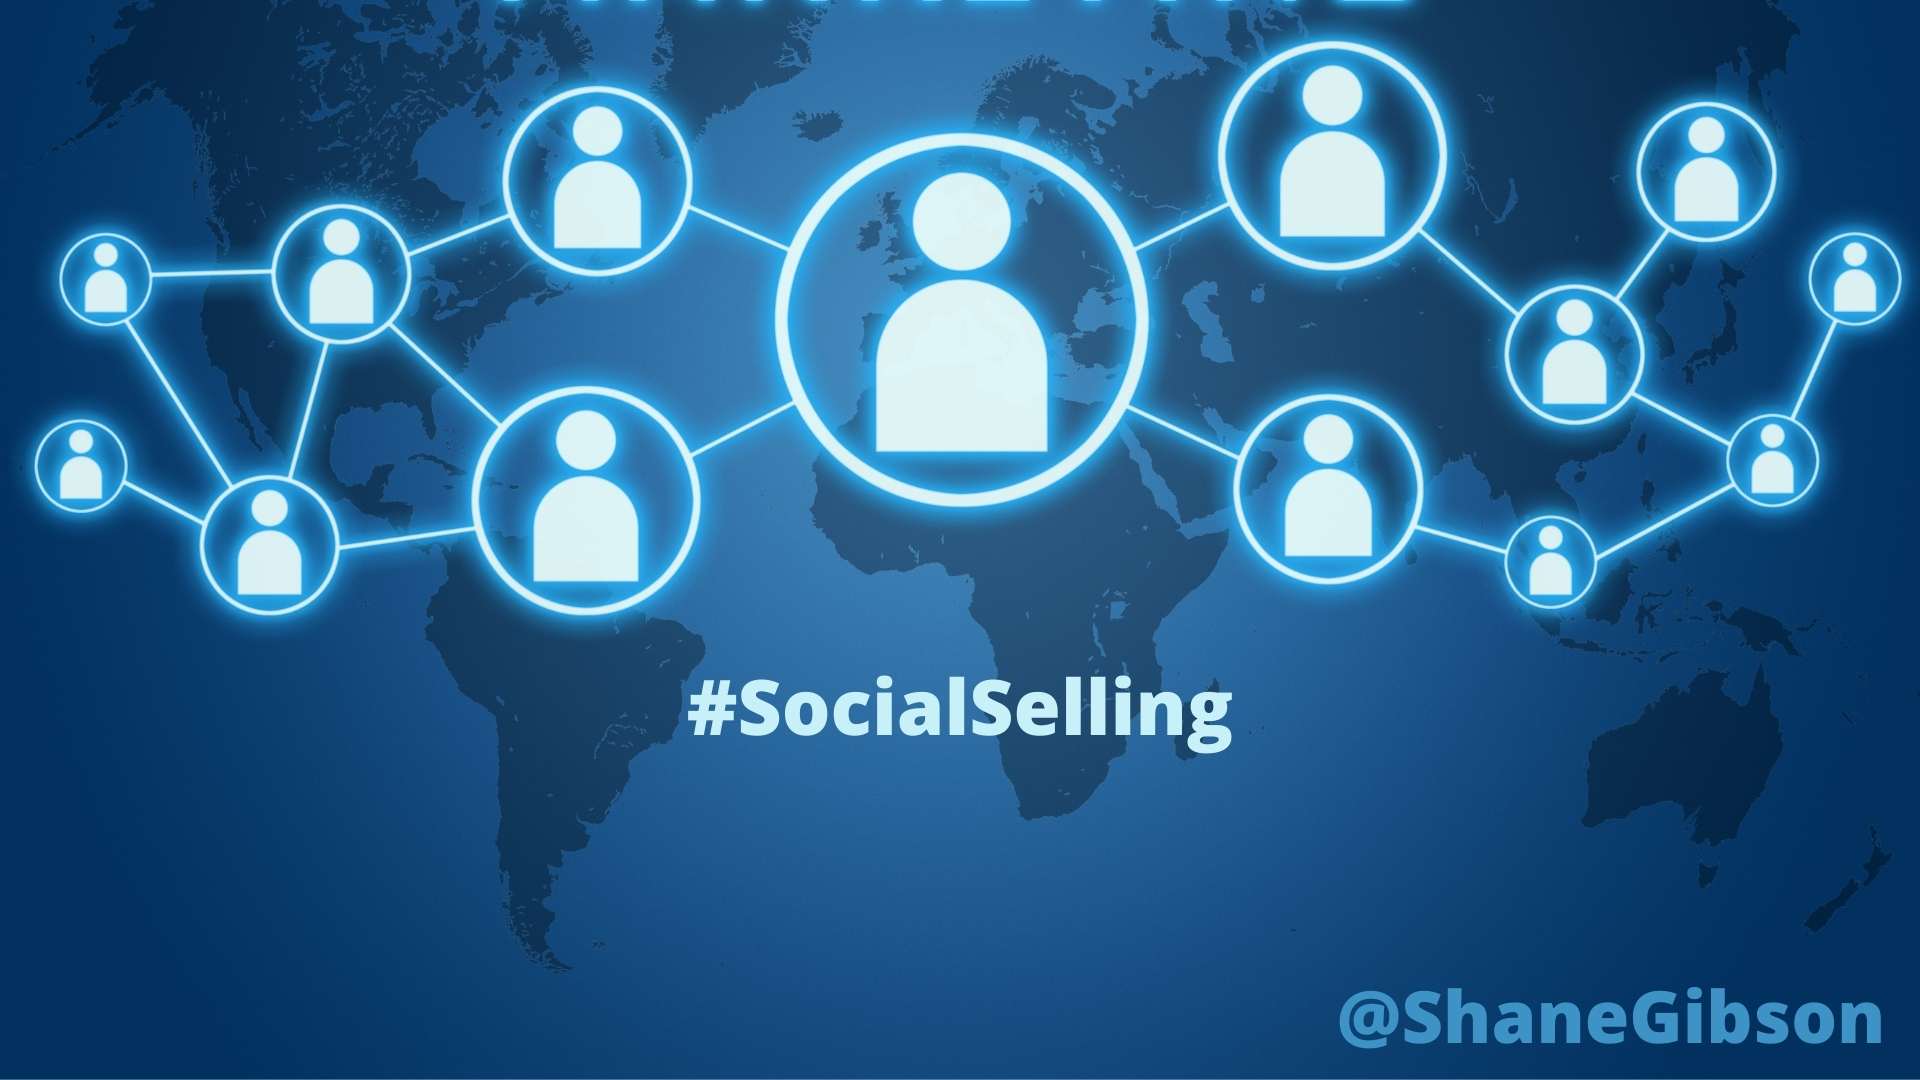 What kind of social media content should salespeople post and share?